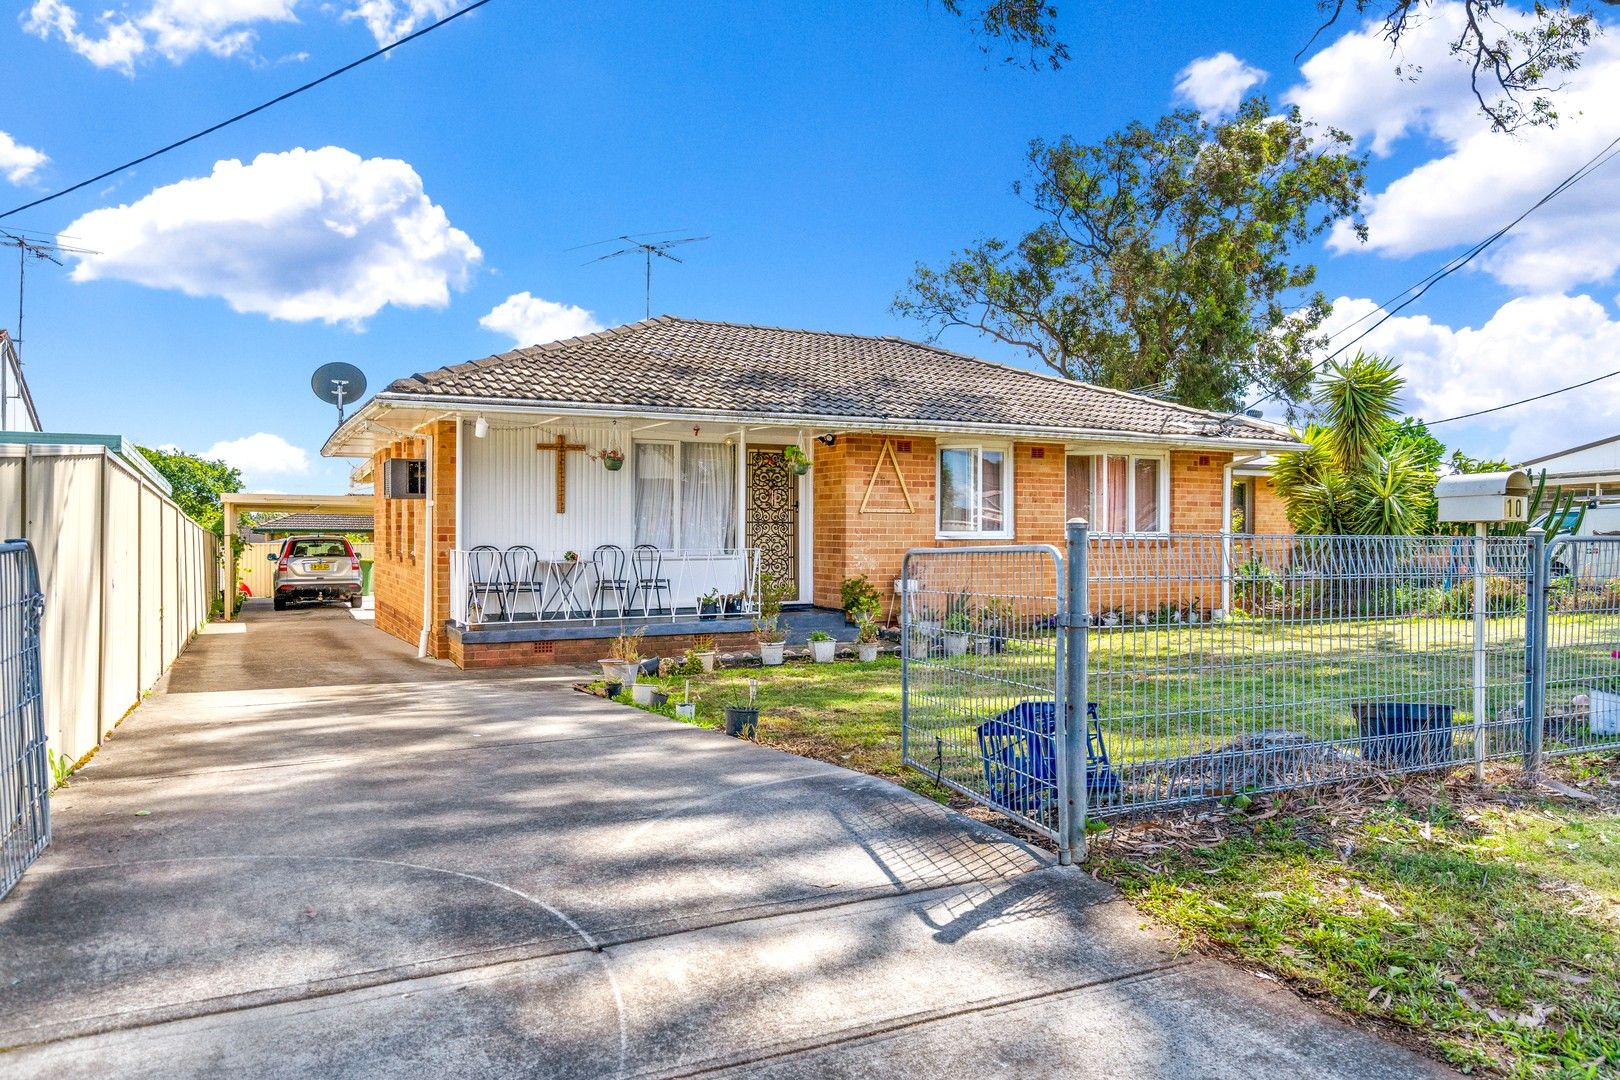 10 STEVENAGE RD, Canley Heights NSW 2166, Image 0